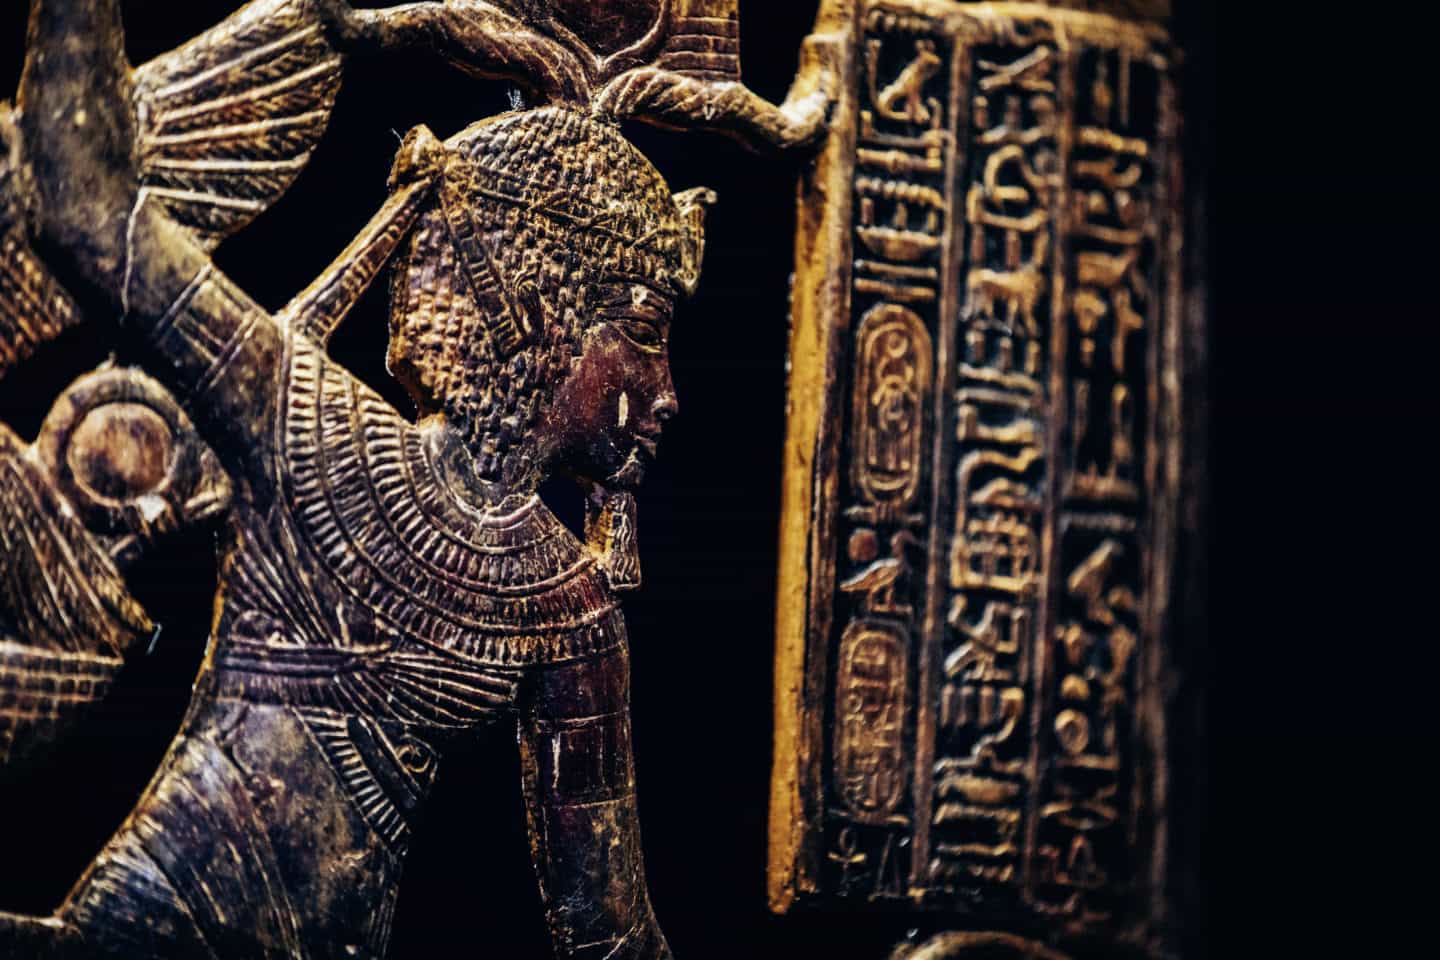 Close up of a ceremonial shield from the Tutankhamun exhibition at the Saatchi Gallery in London